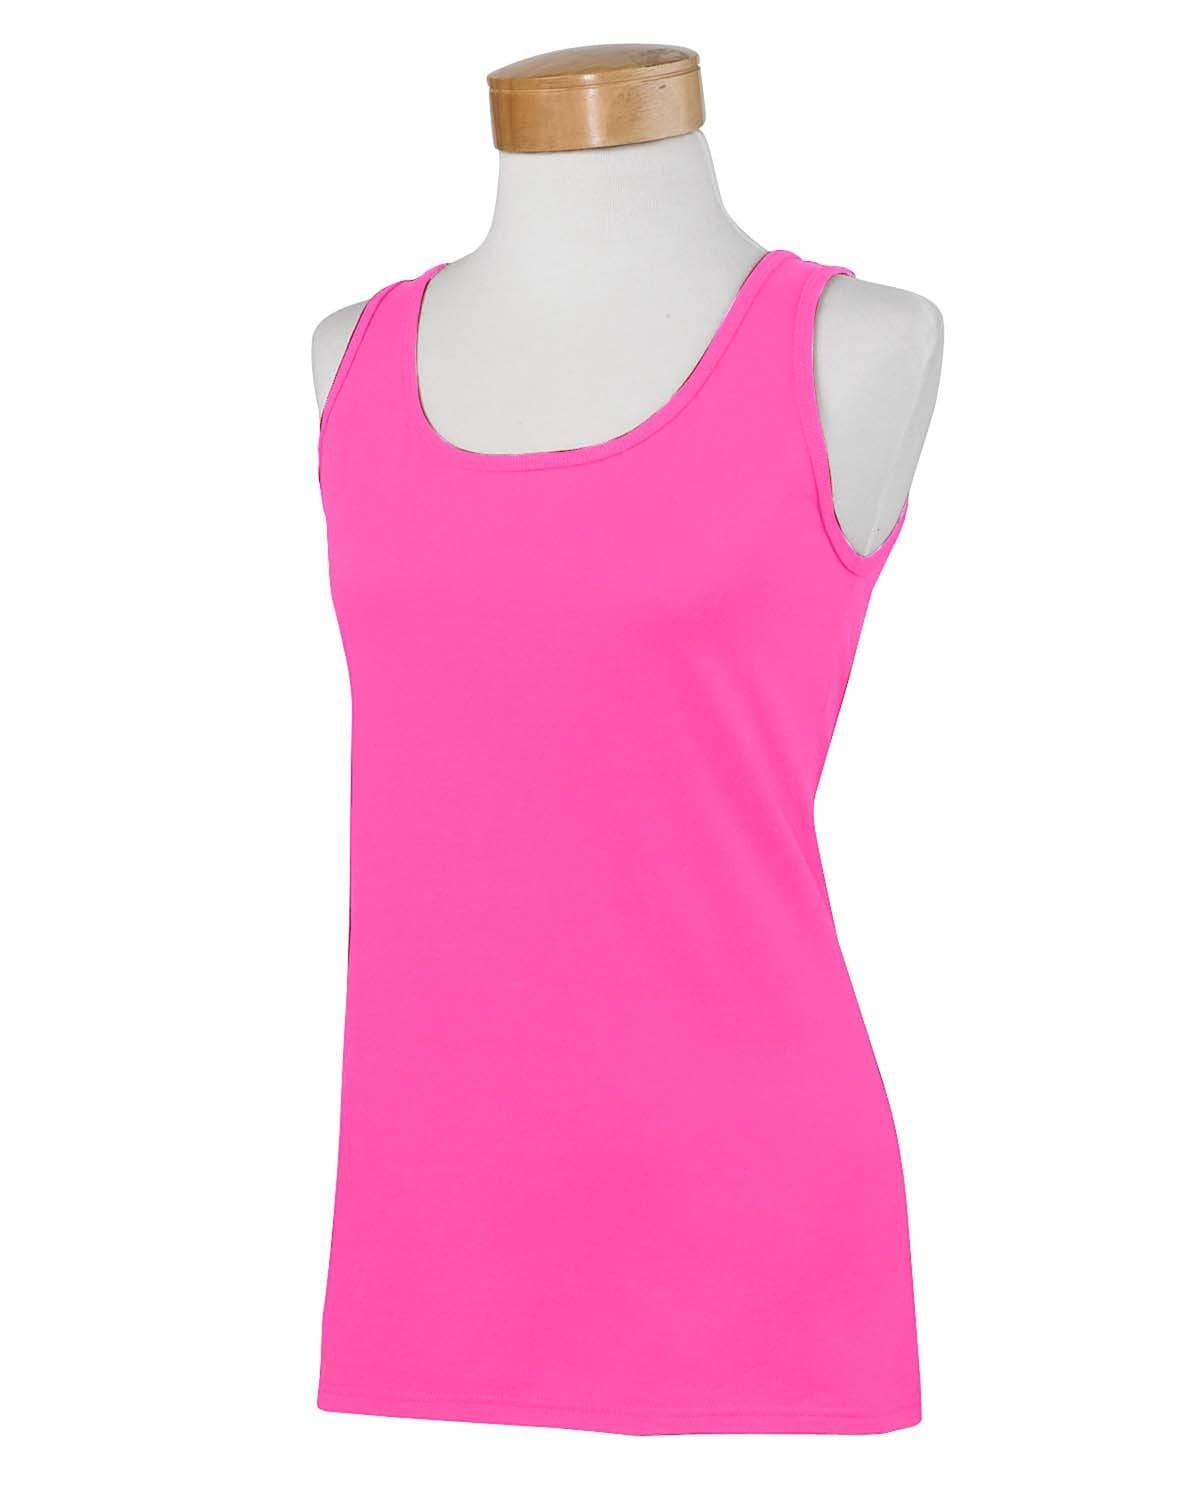 g642l-ladies-softstyle-4-5-oz-fitted-tank-Small-AZALEA-Oasispromos